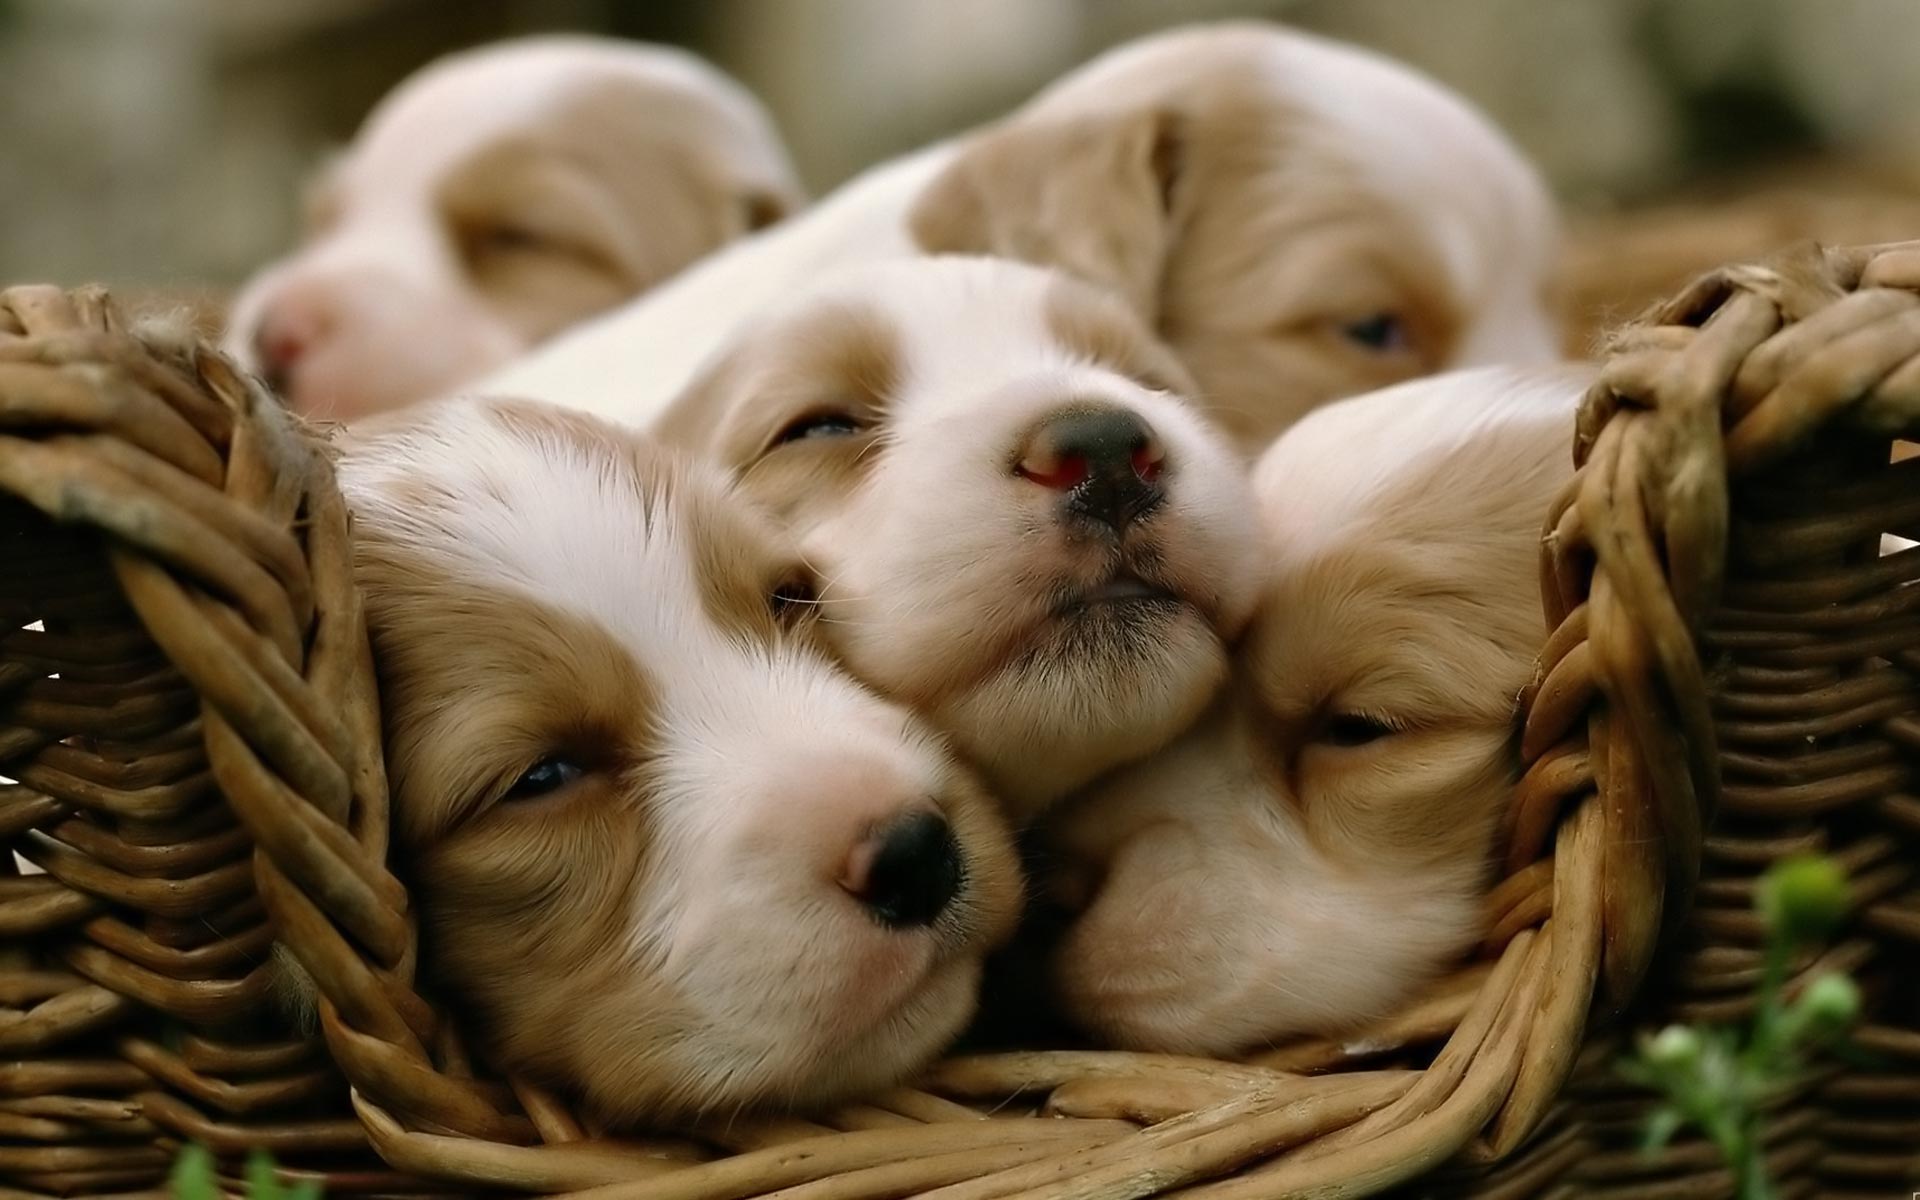 Cute Puppy Wallpapers Those Are Perfect To Make Your Mood Happy - Let Us Publish